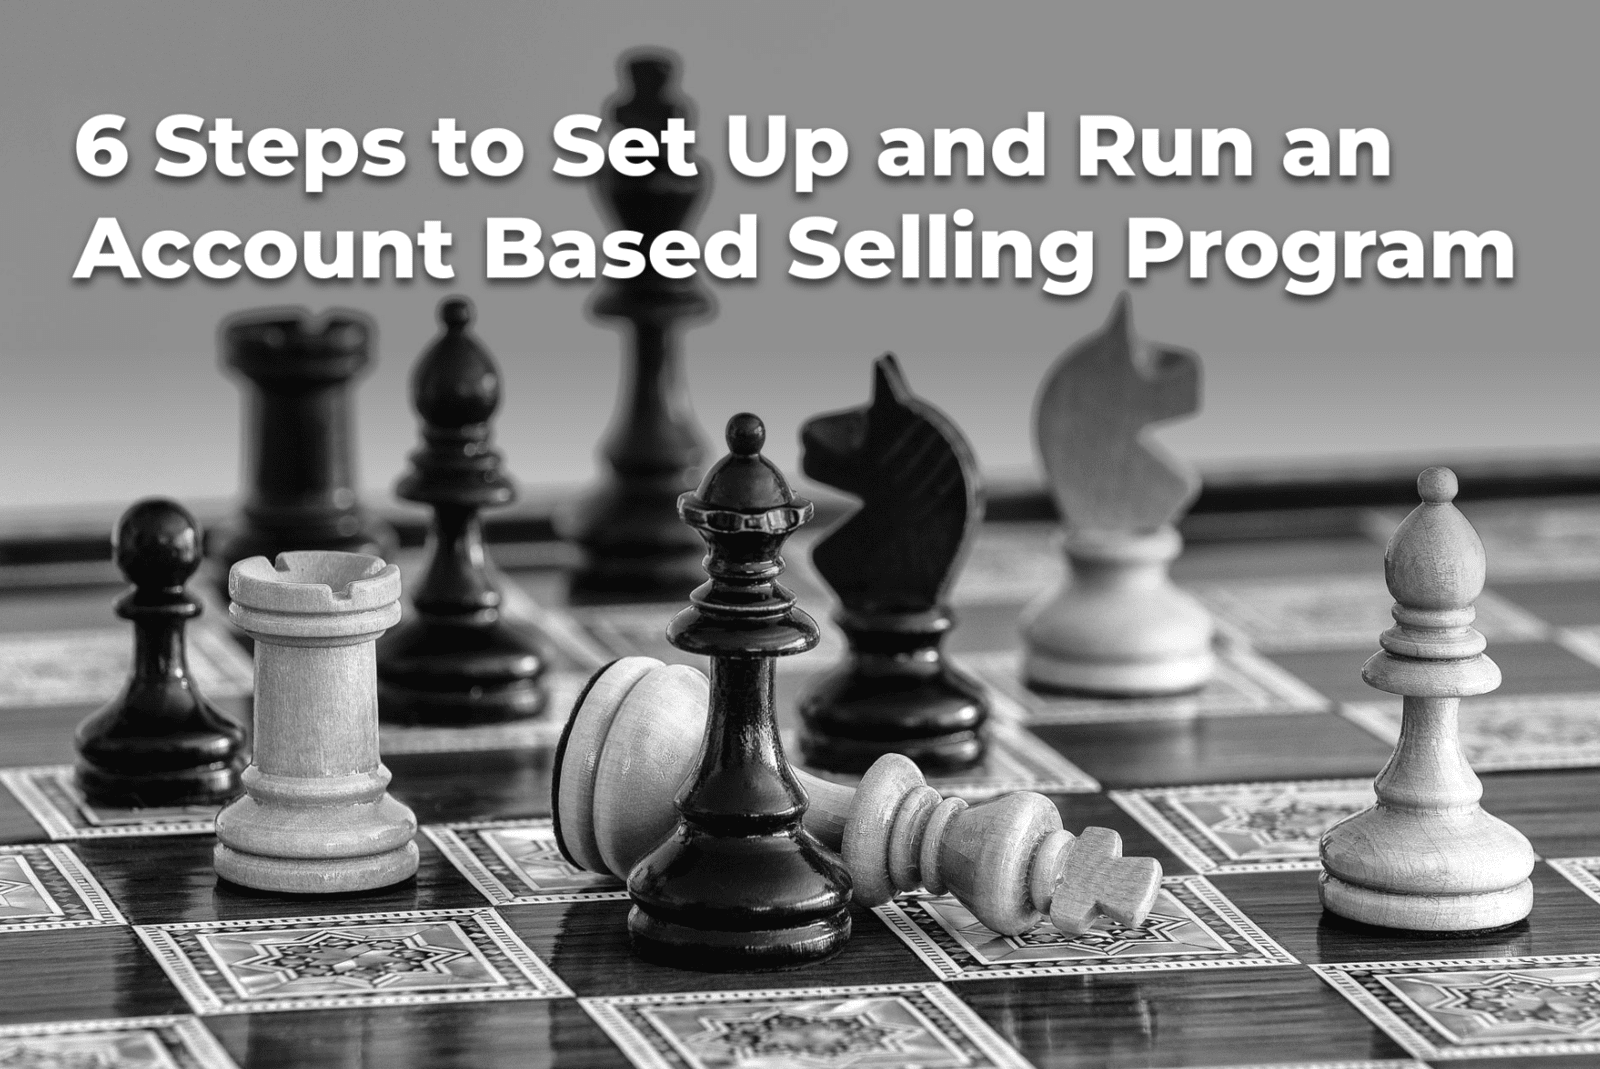 6 Steps to Set Up and Run an Account Based Selling Program